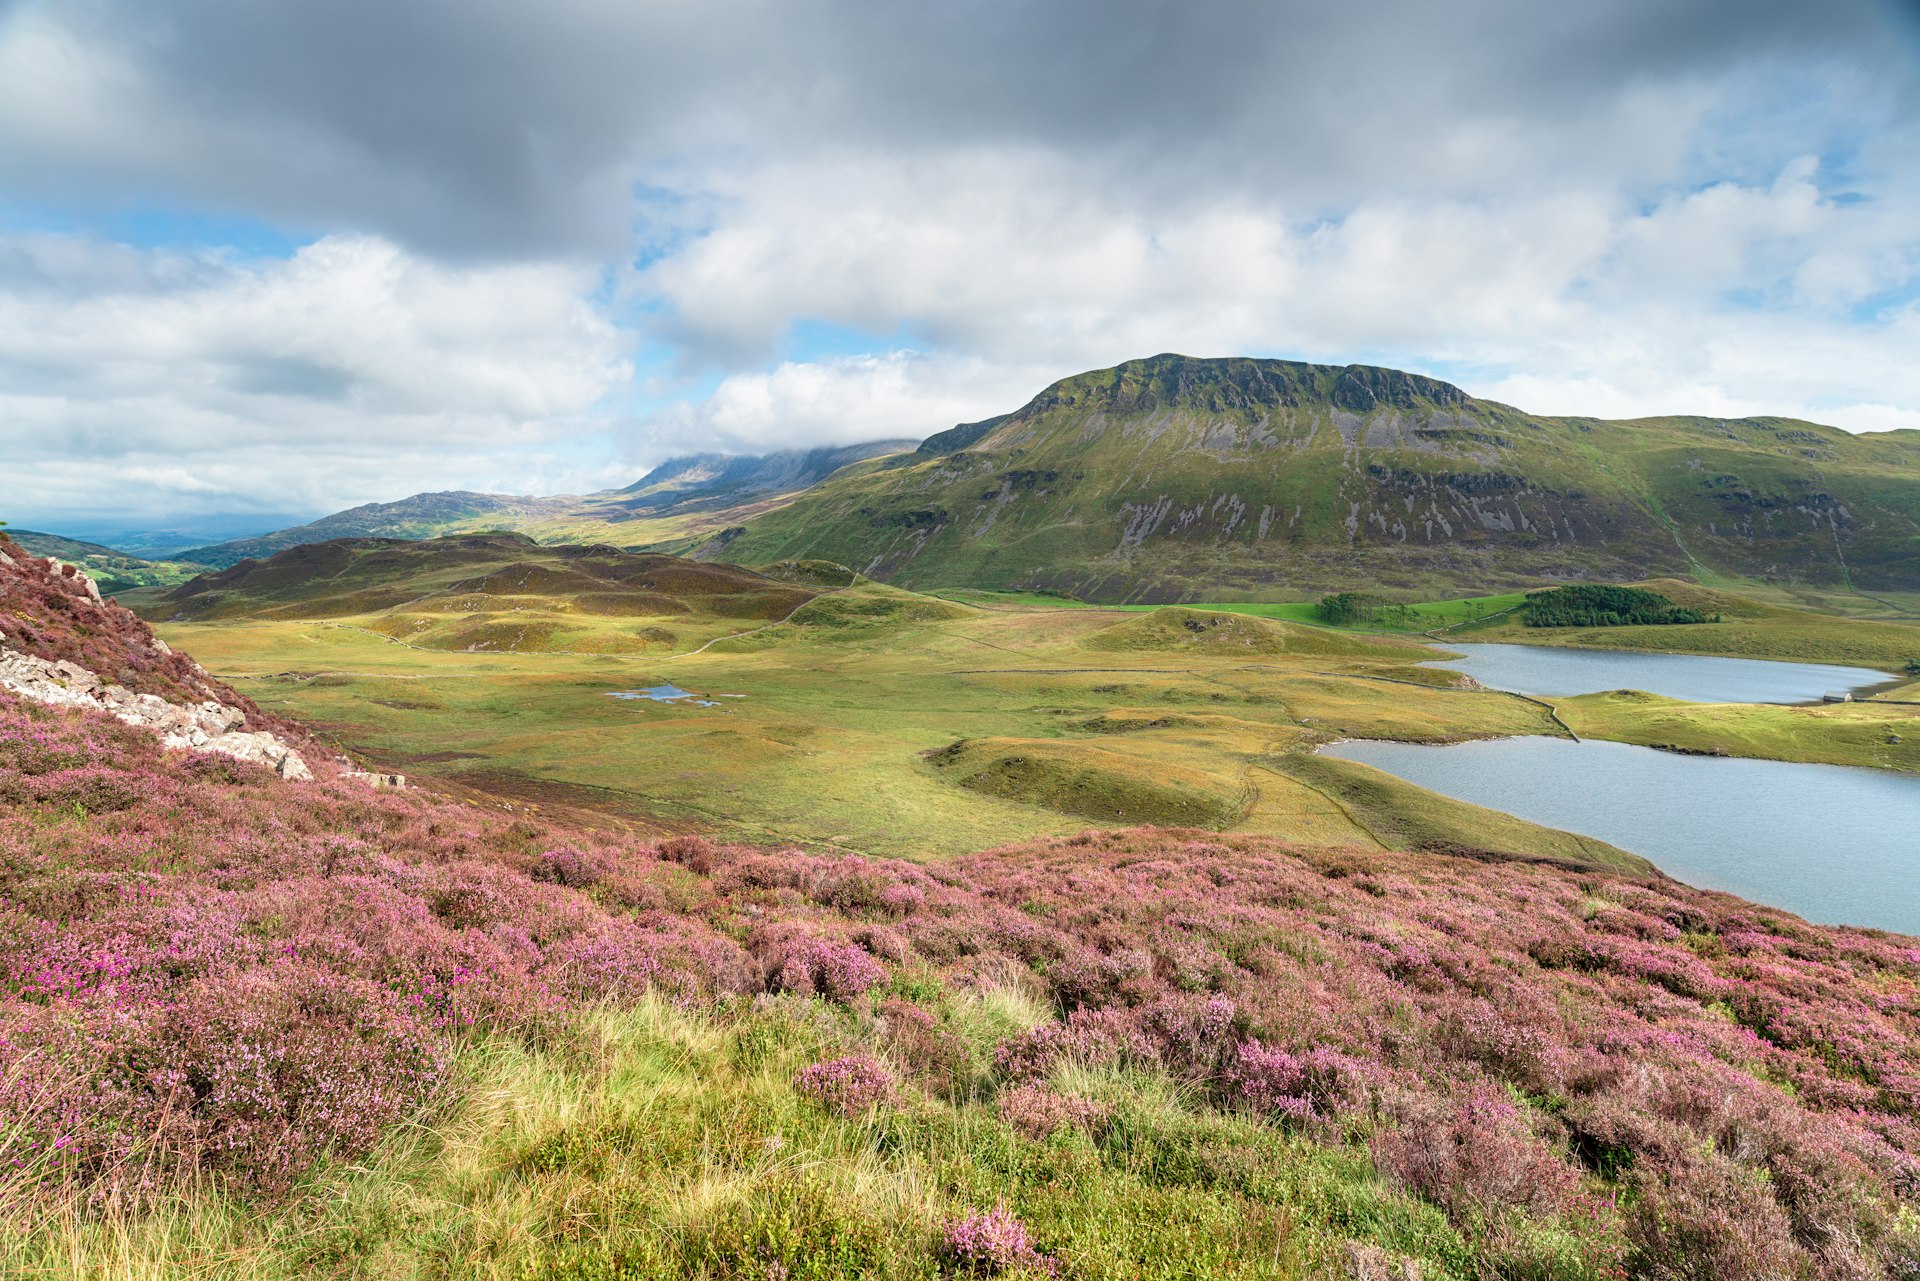 Landscape and lakes in the Cadair Idris Mountains in Snowdonia, Wales